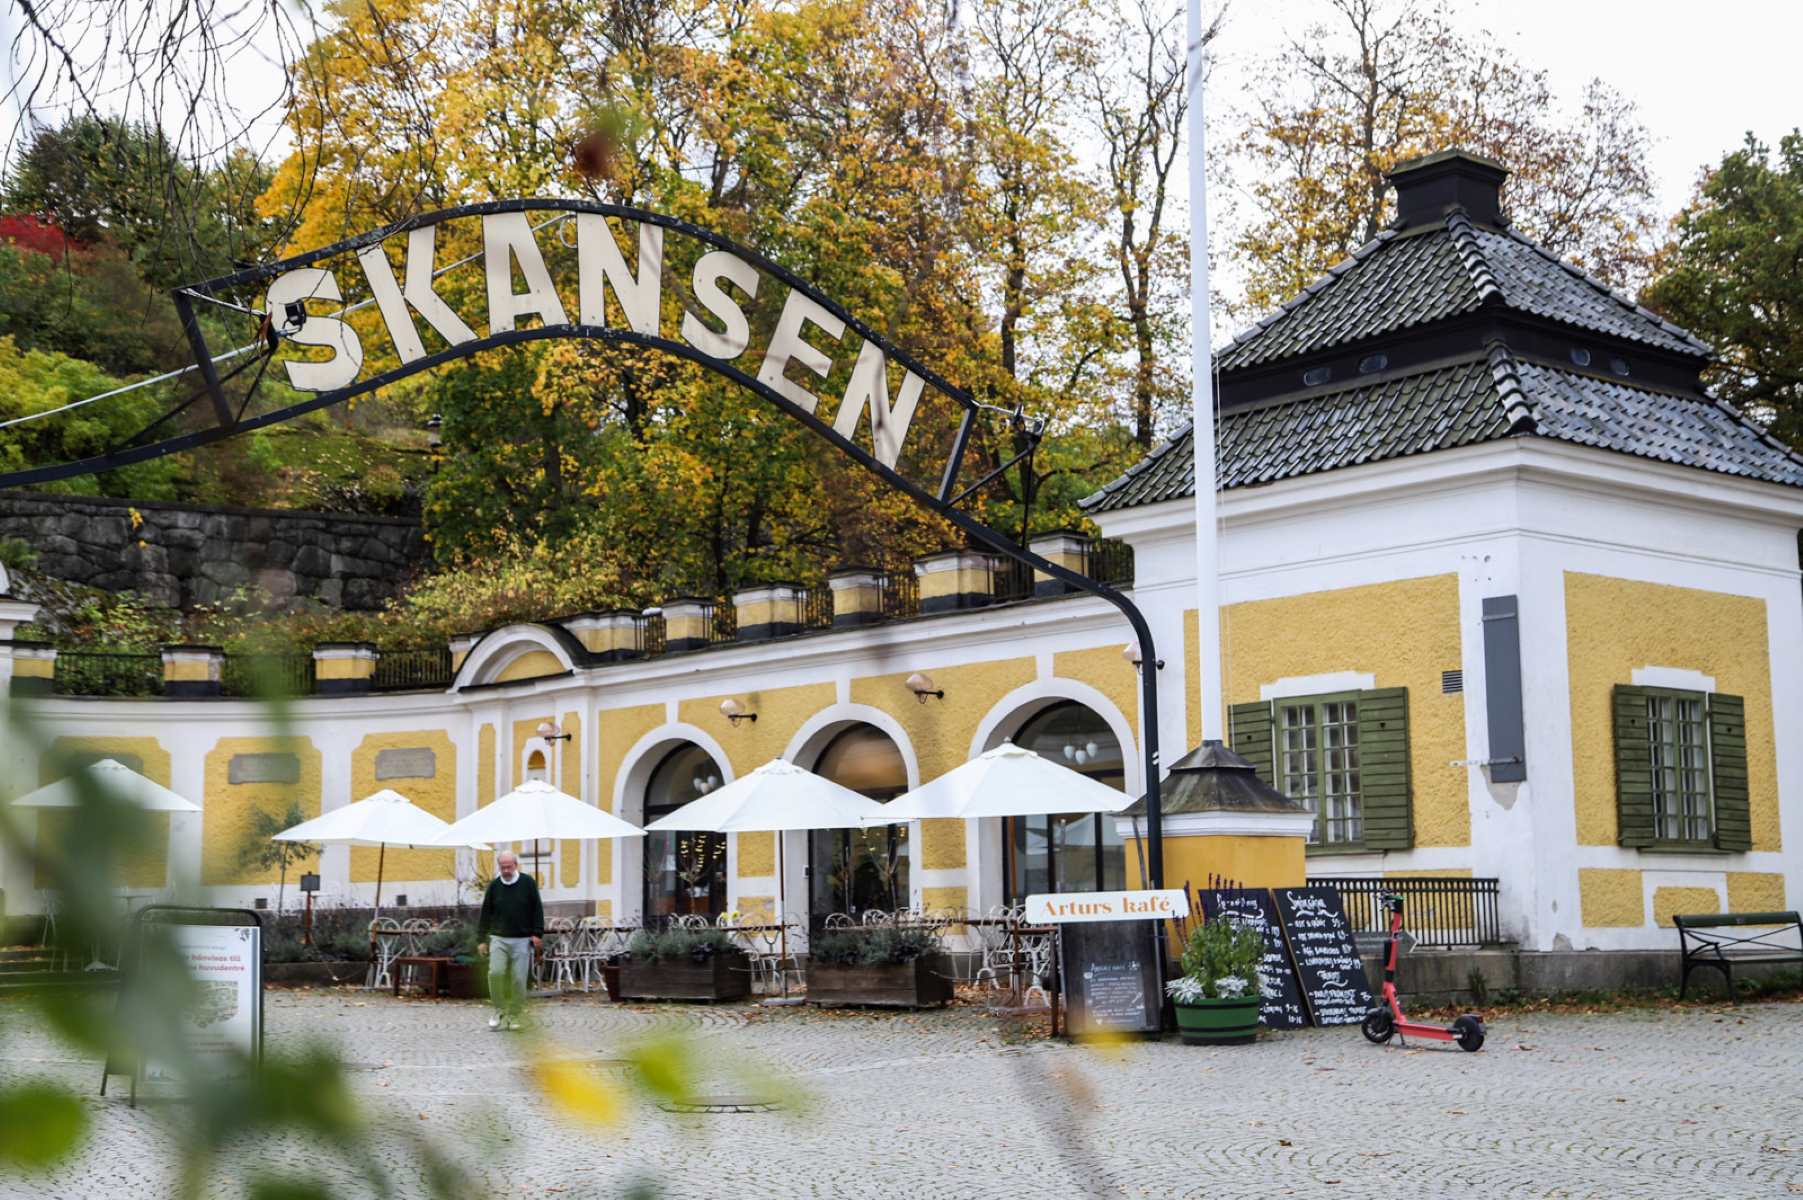 12-captivating-facts-about-stockholms-skansen